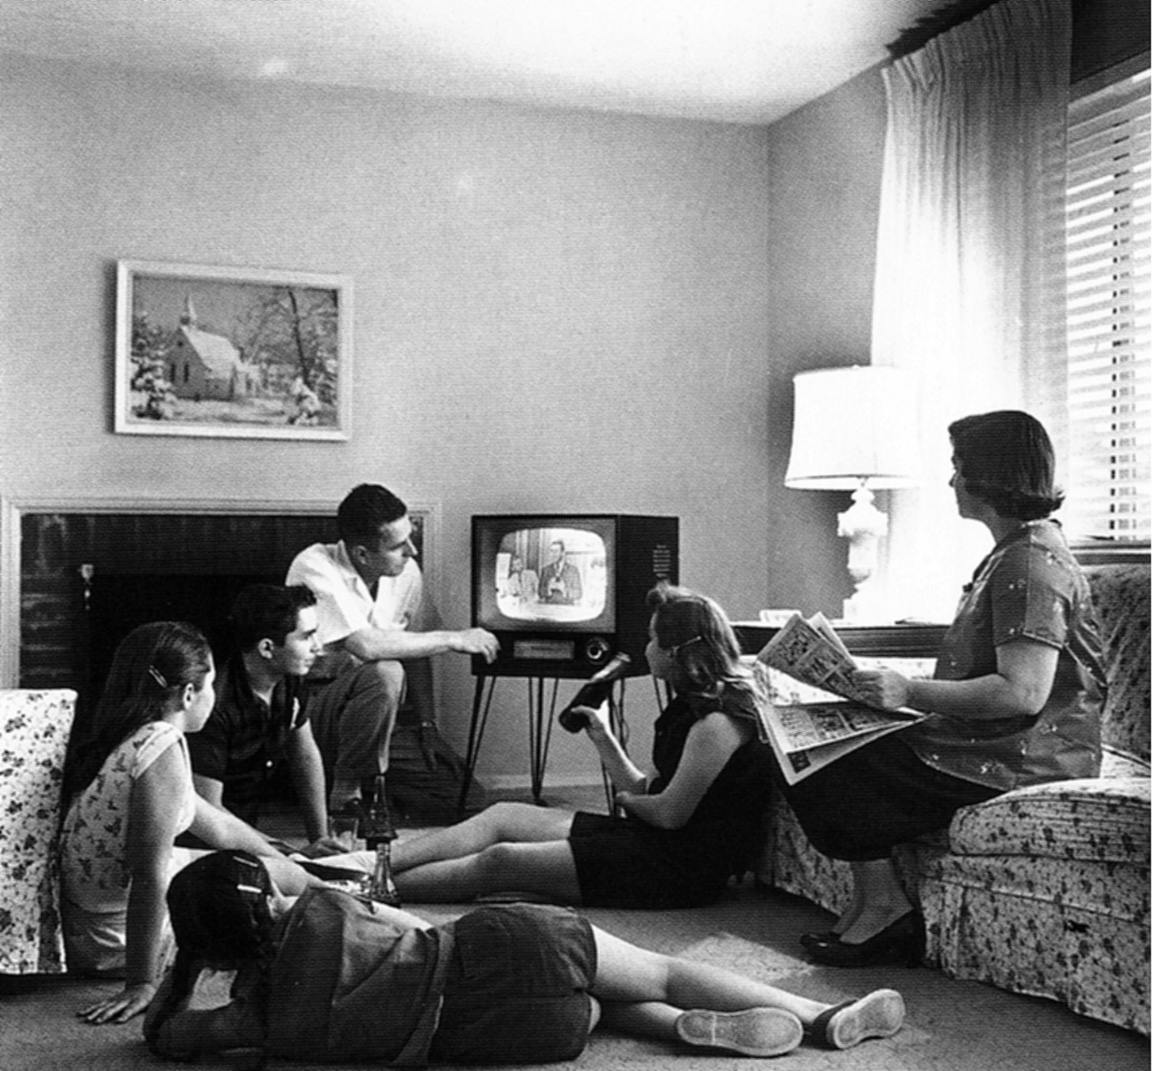 A family watching TV. Remember when that was a thing? No, me neither